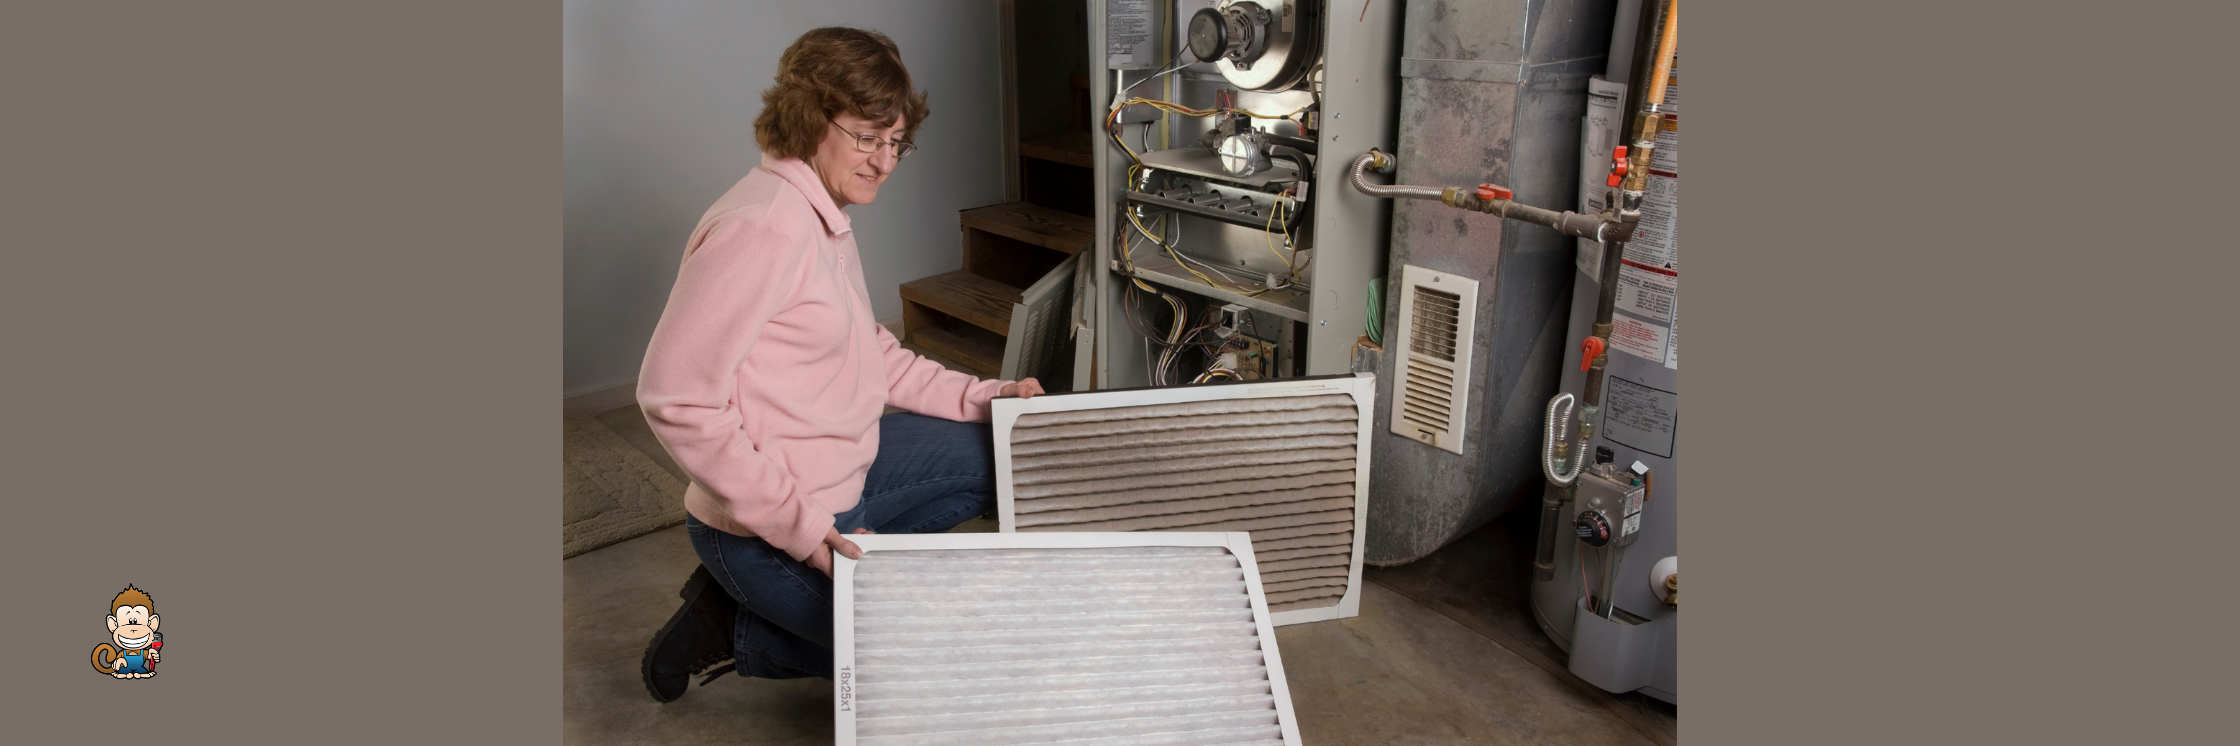 Pros and Cons of Gas Furnace Systems